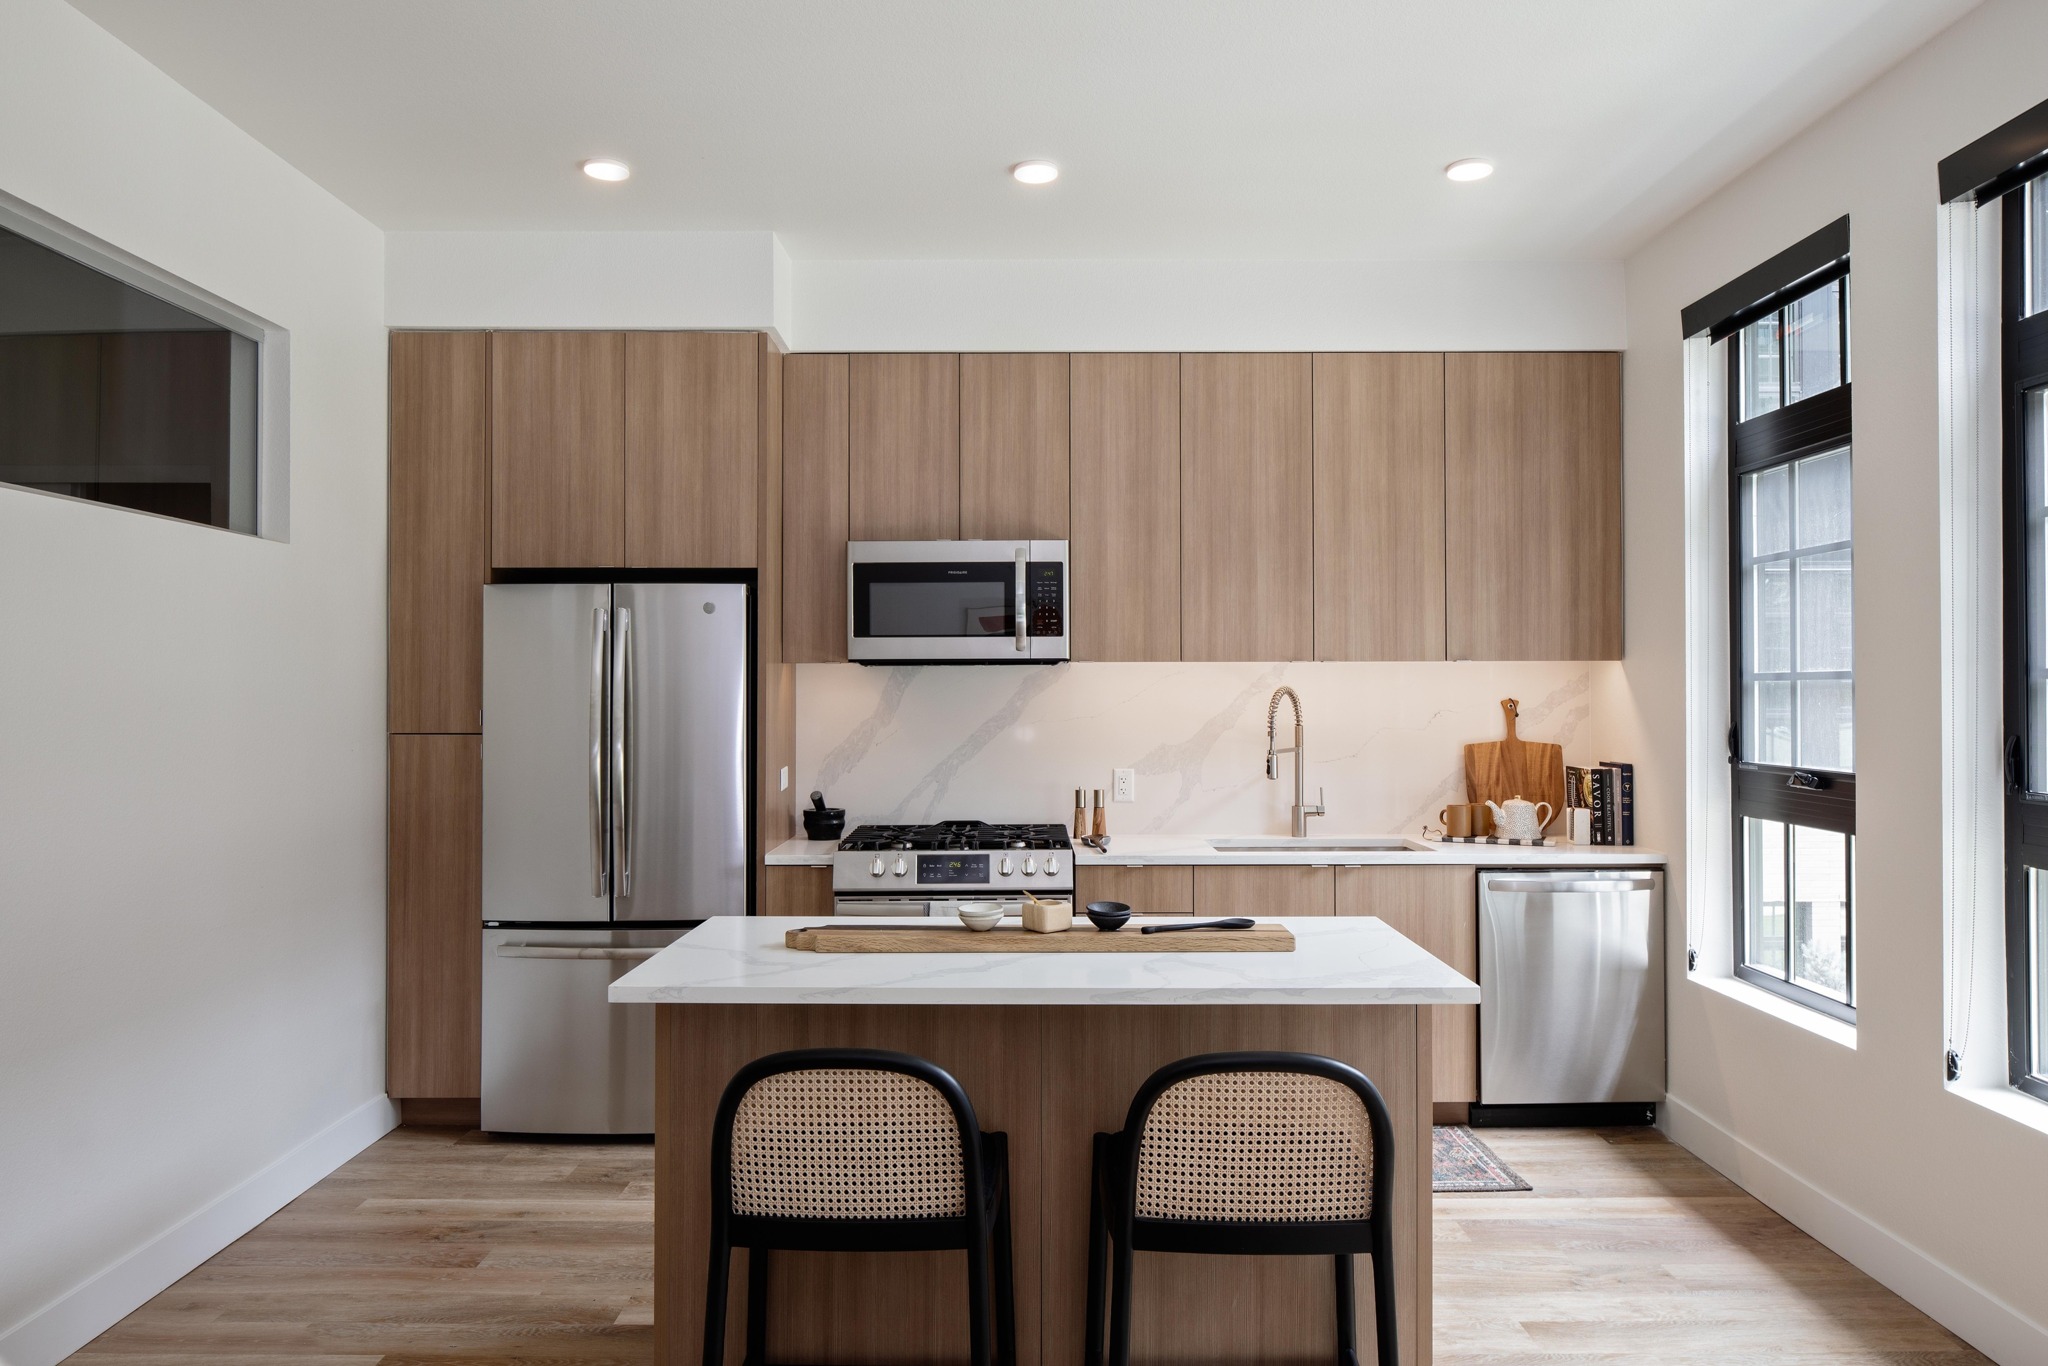 light wood cabinet in kitchen with island modera art park apartment homes for rent in denver colorado